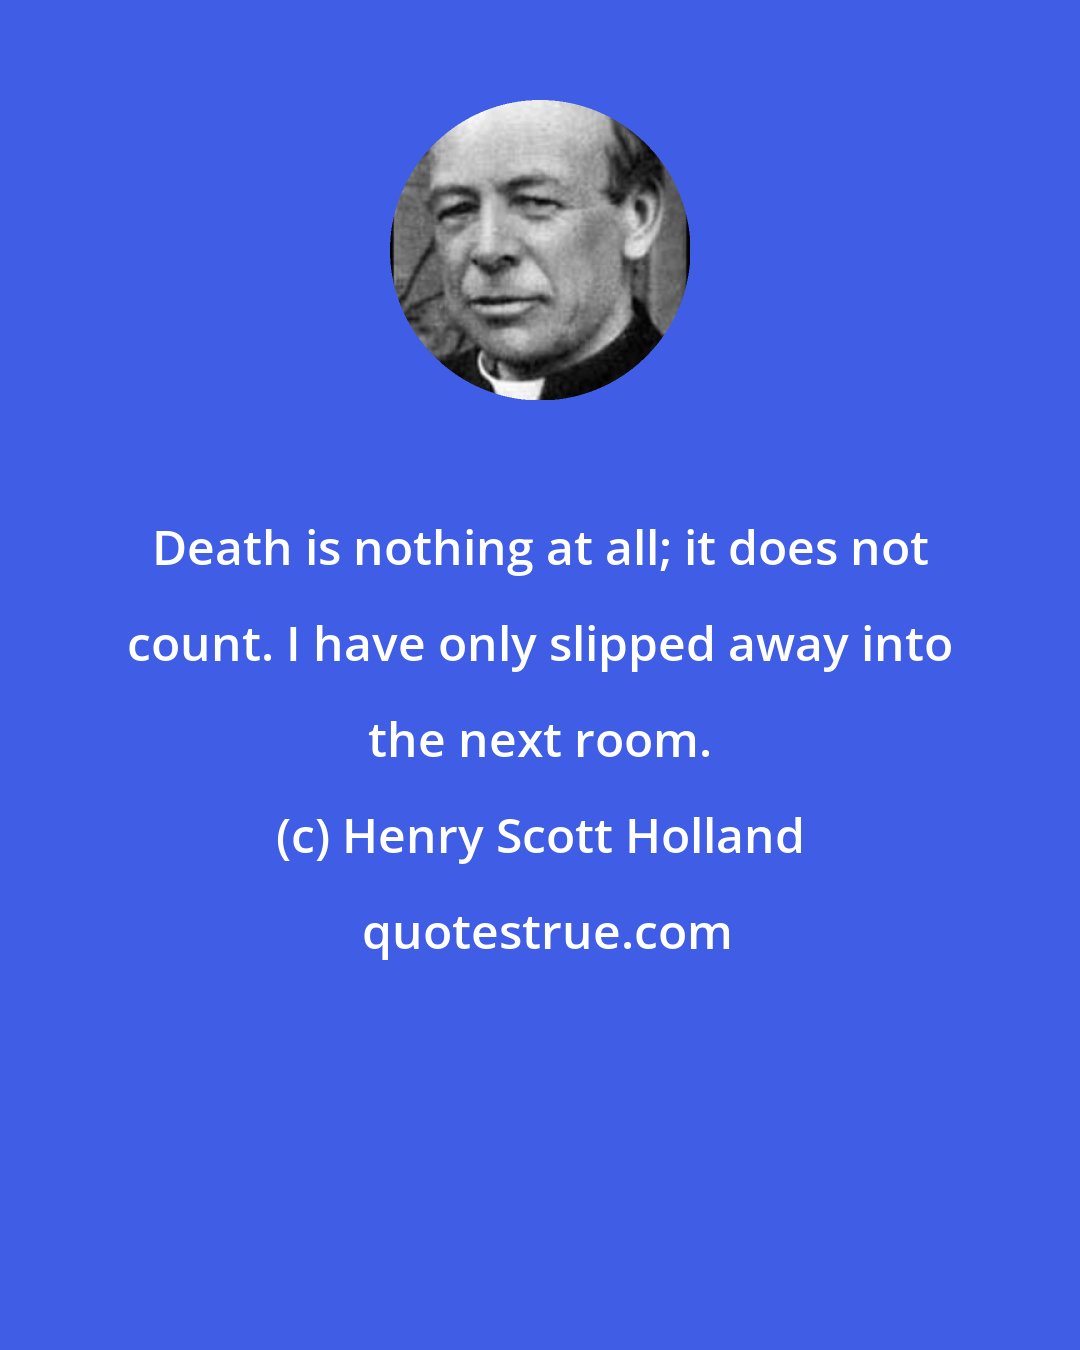 Henry Scott Holland: Death is nothing at all; it does not count. I have only slipped away into the next room.